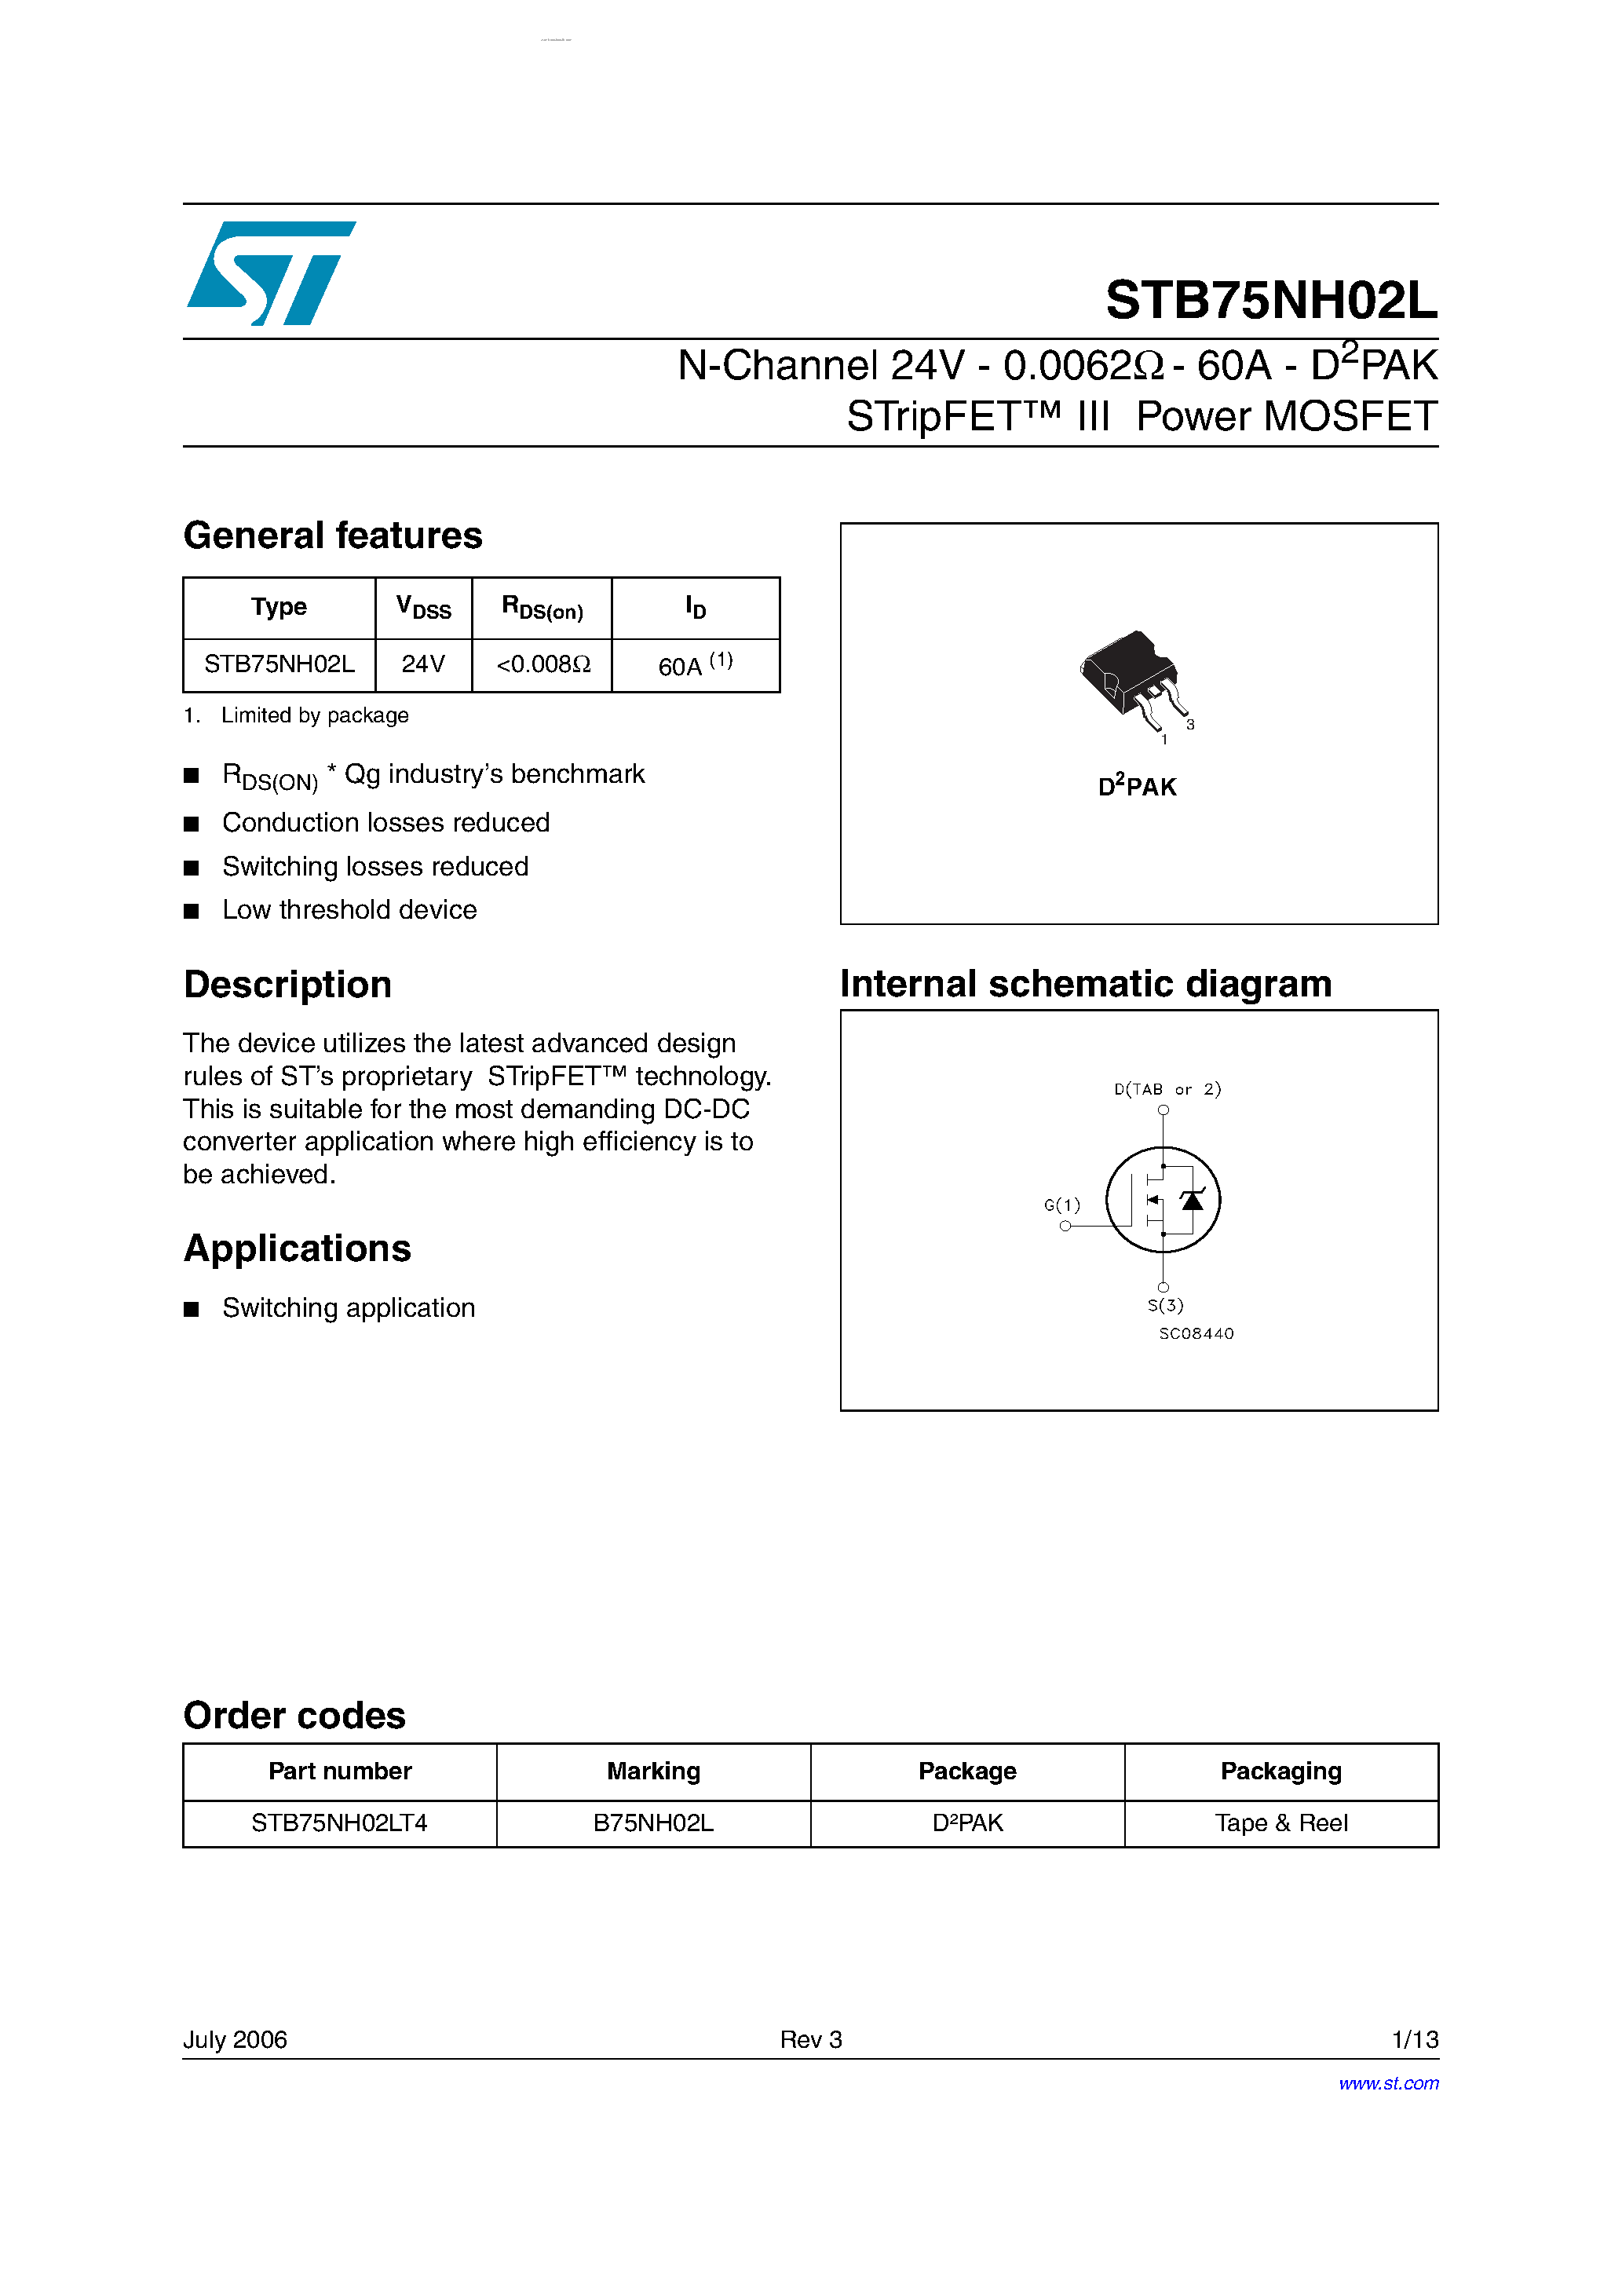 Datasheet STB75NH02L - N-channel Power MOSFET page 1